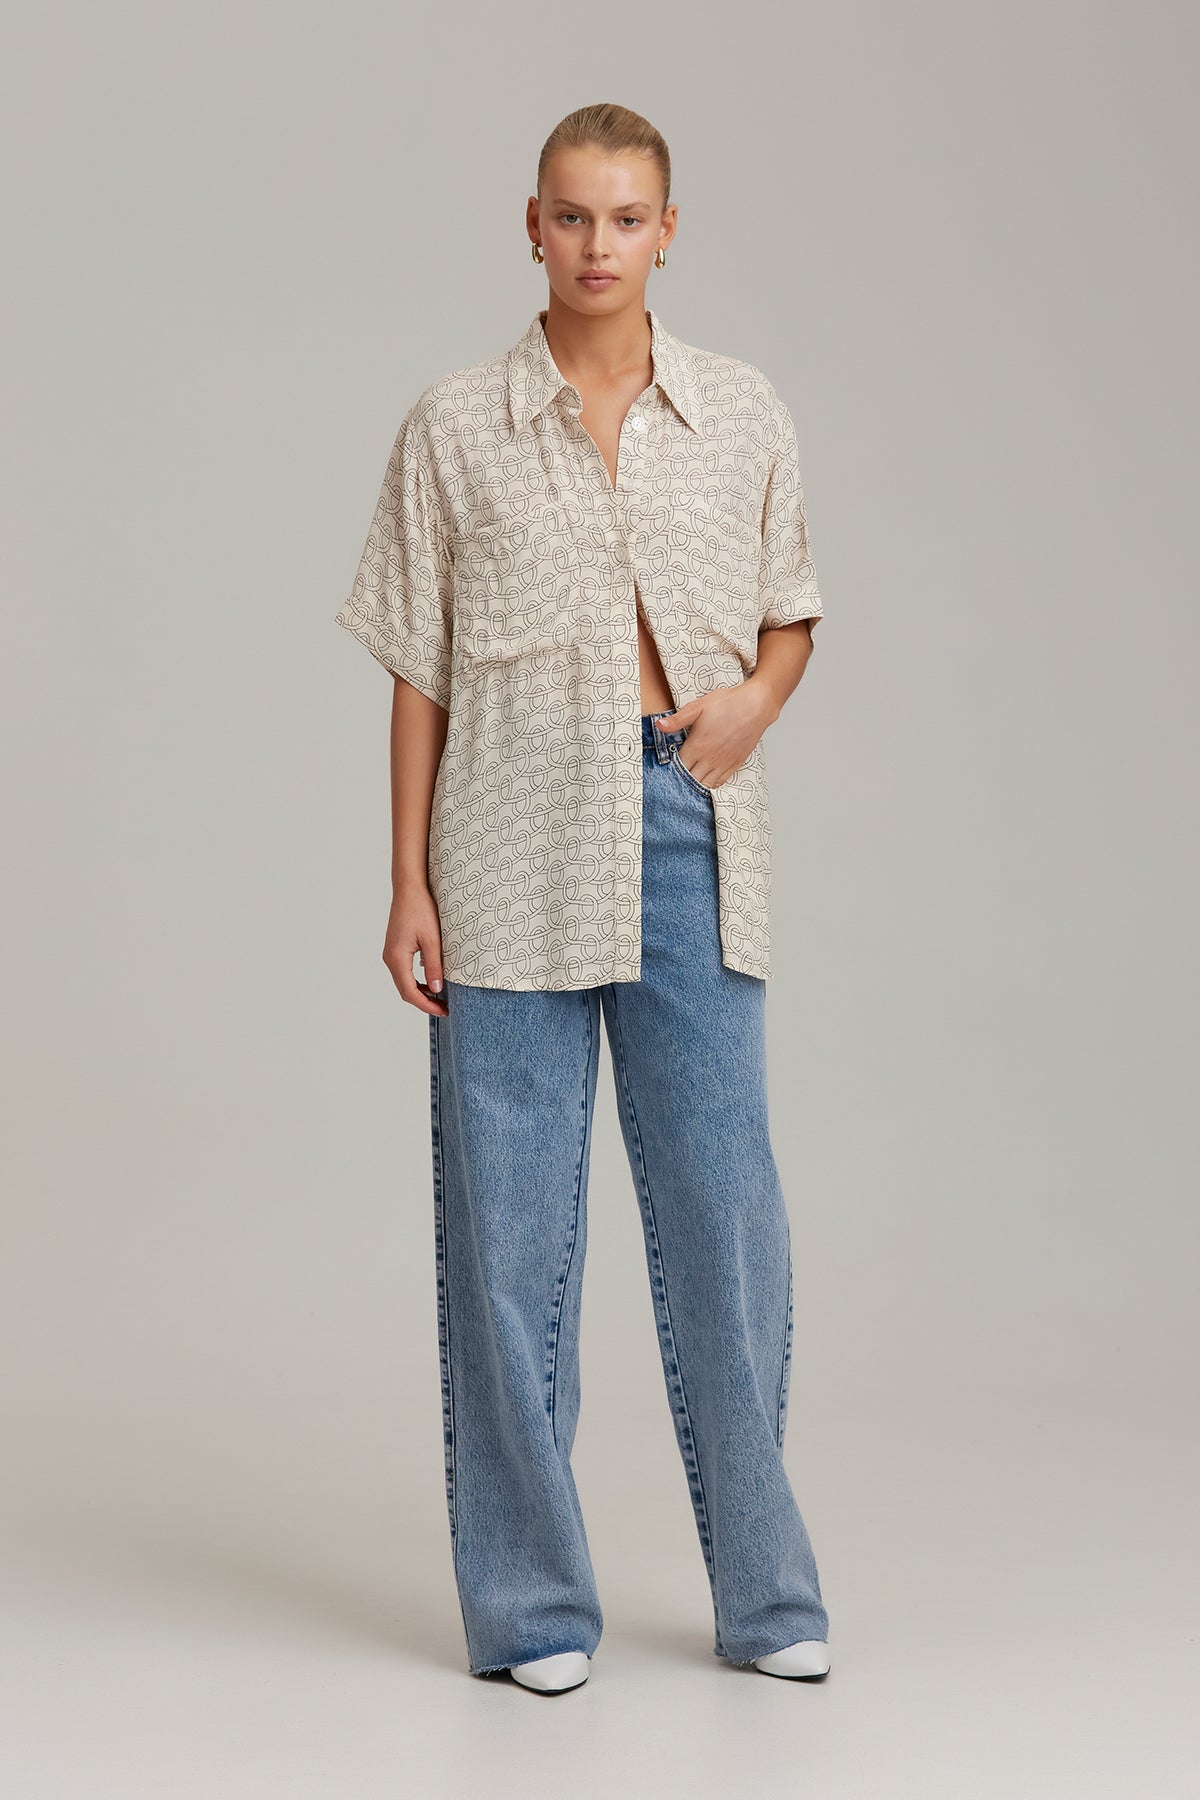 C/MEO Collective - Sincerely Shirt - Link Print